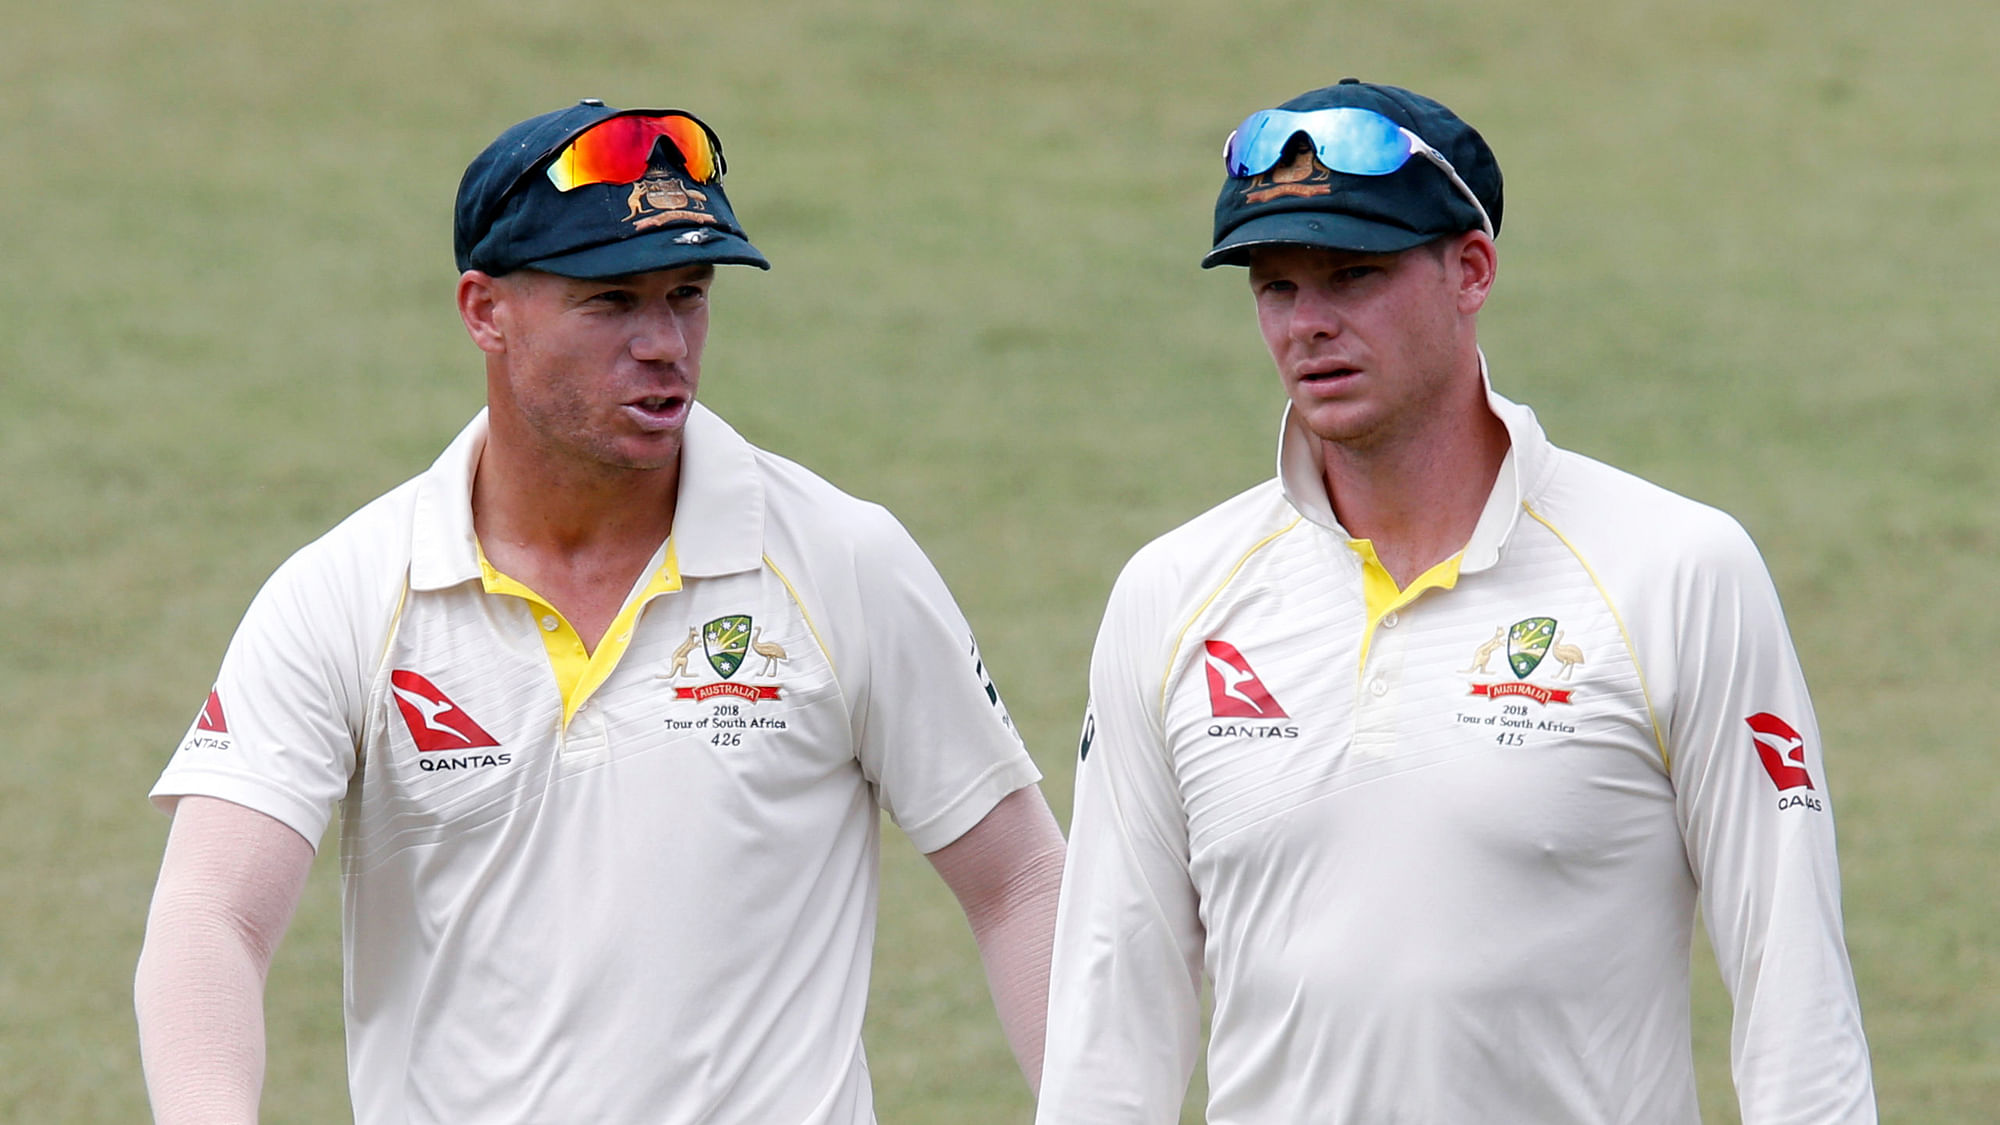 Steve Smith and David Warner both have stood down as captain and vice-captain for the remainder of this Test.